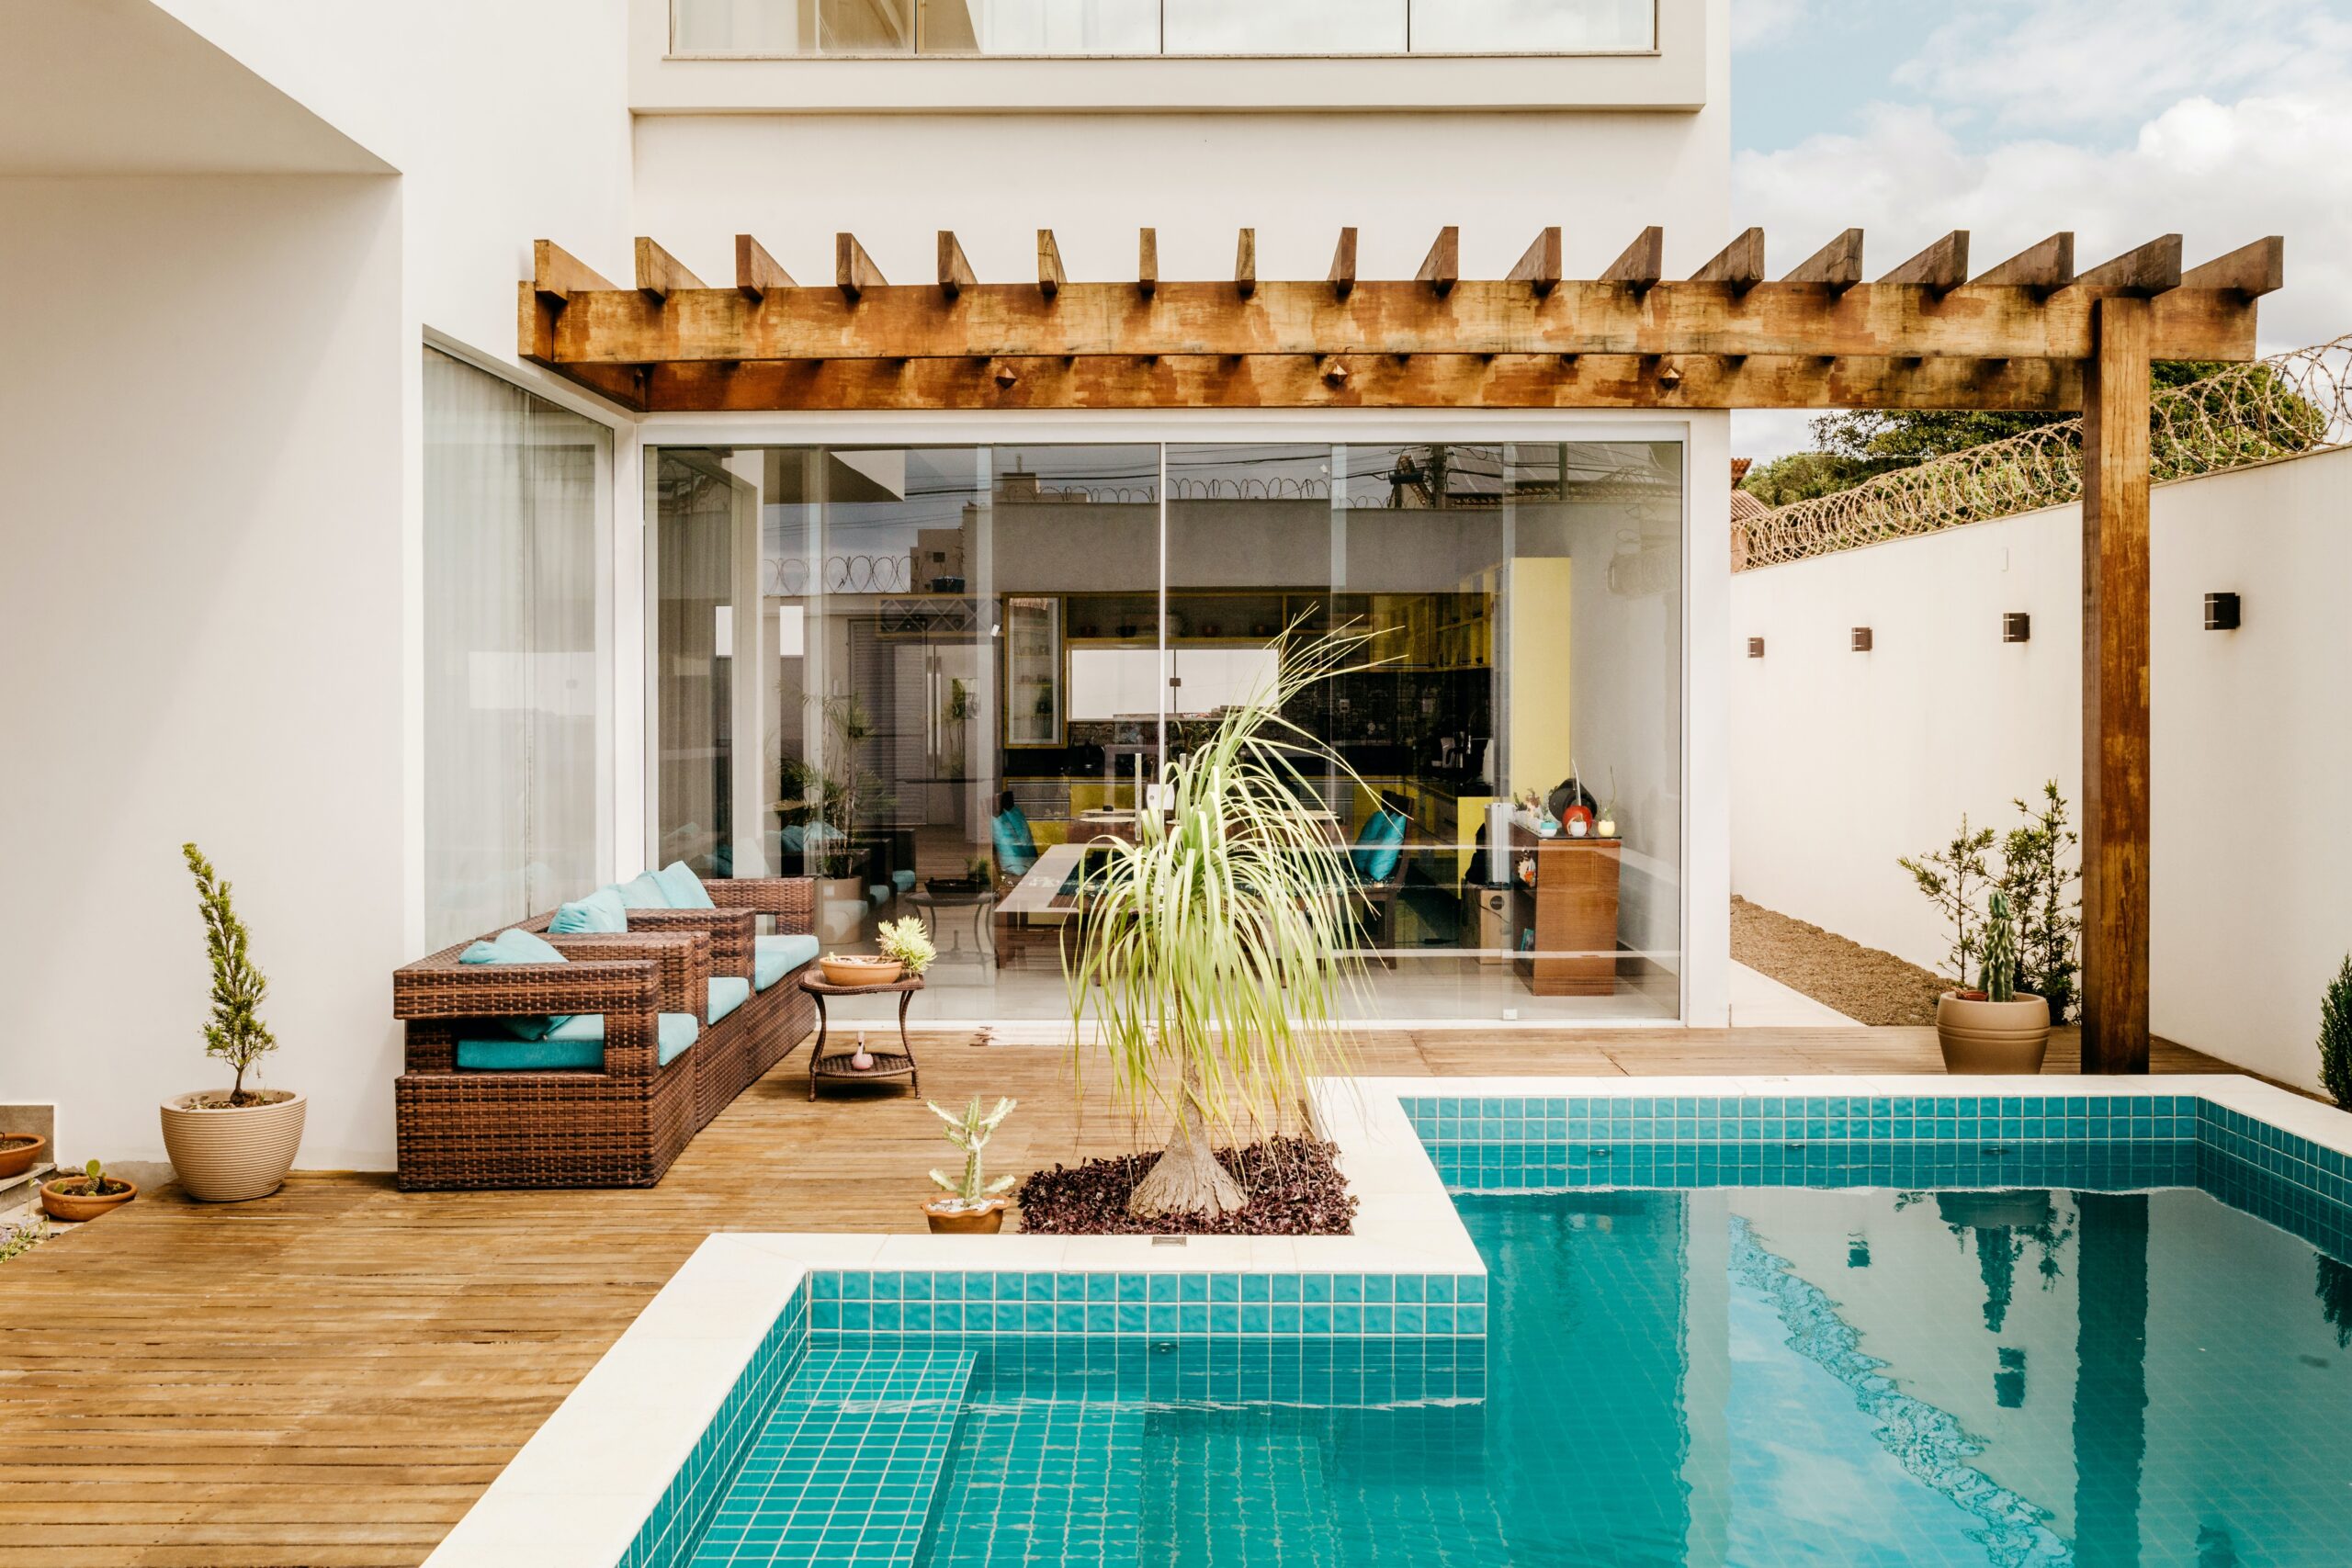 How can you improve your pool area to match your home